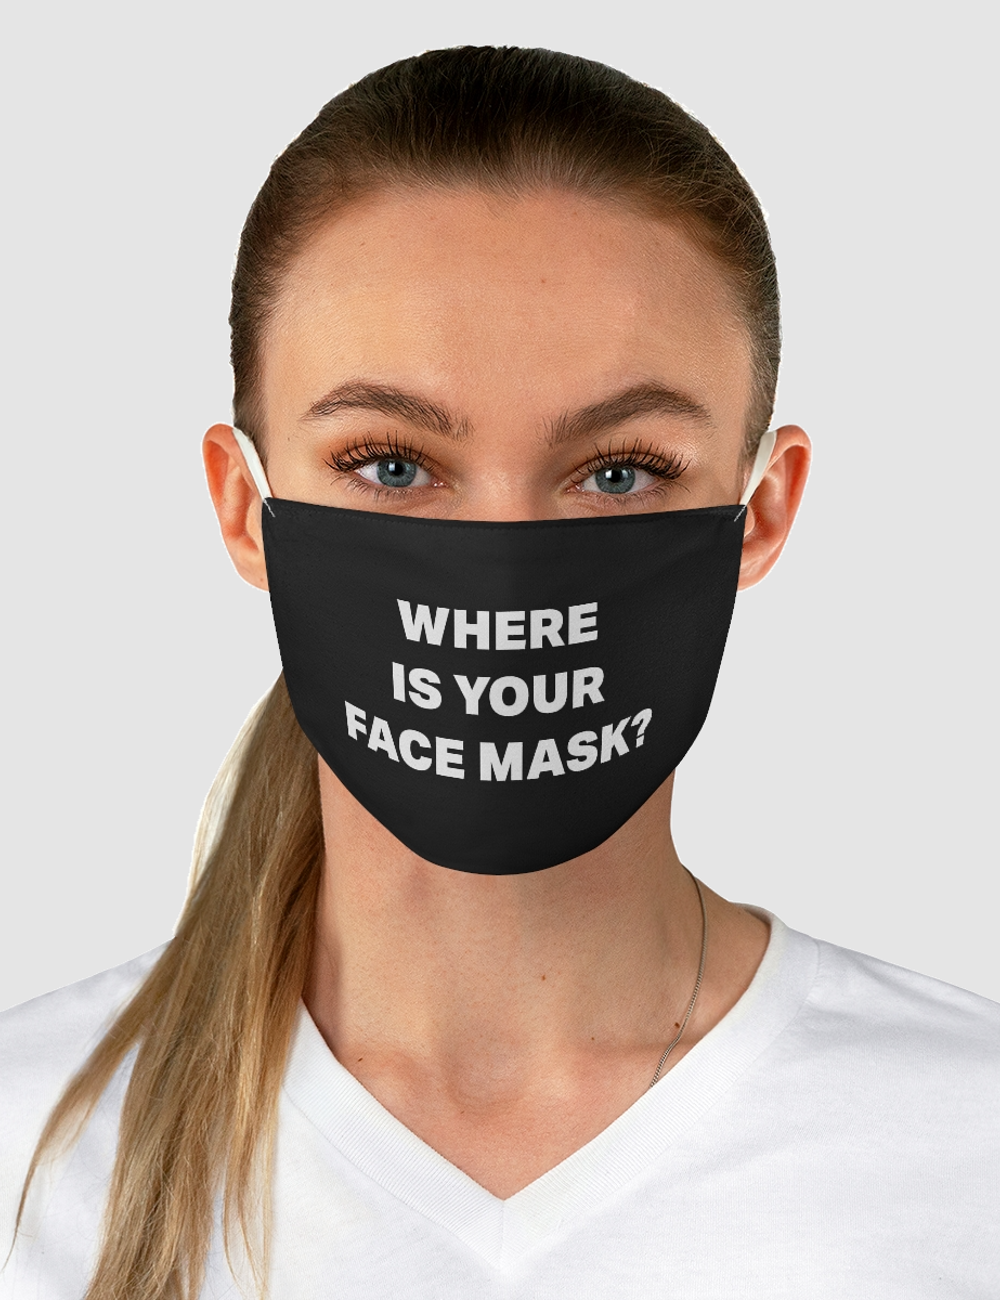 Where Is Your Face Mask? | Fabric Face Mask OniTakai